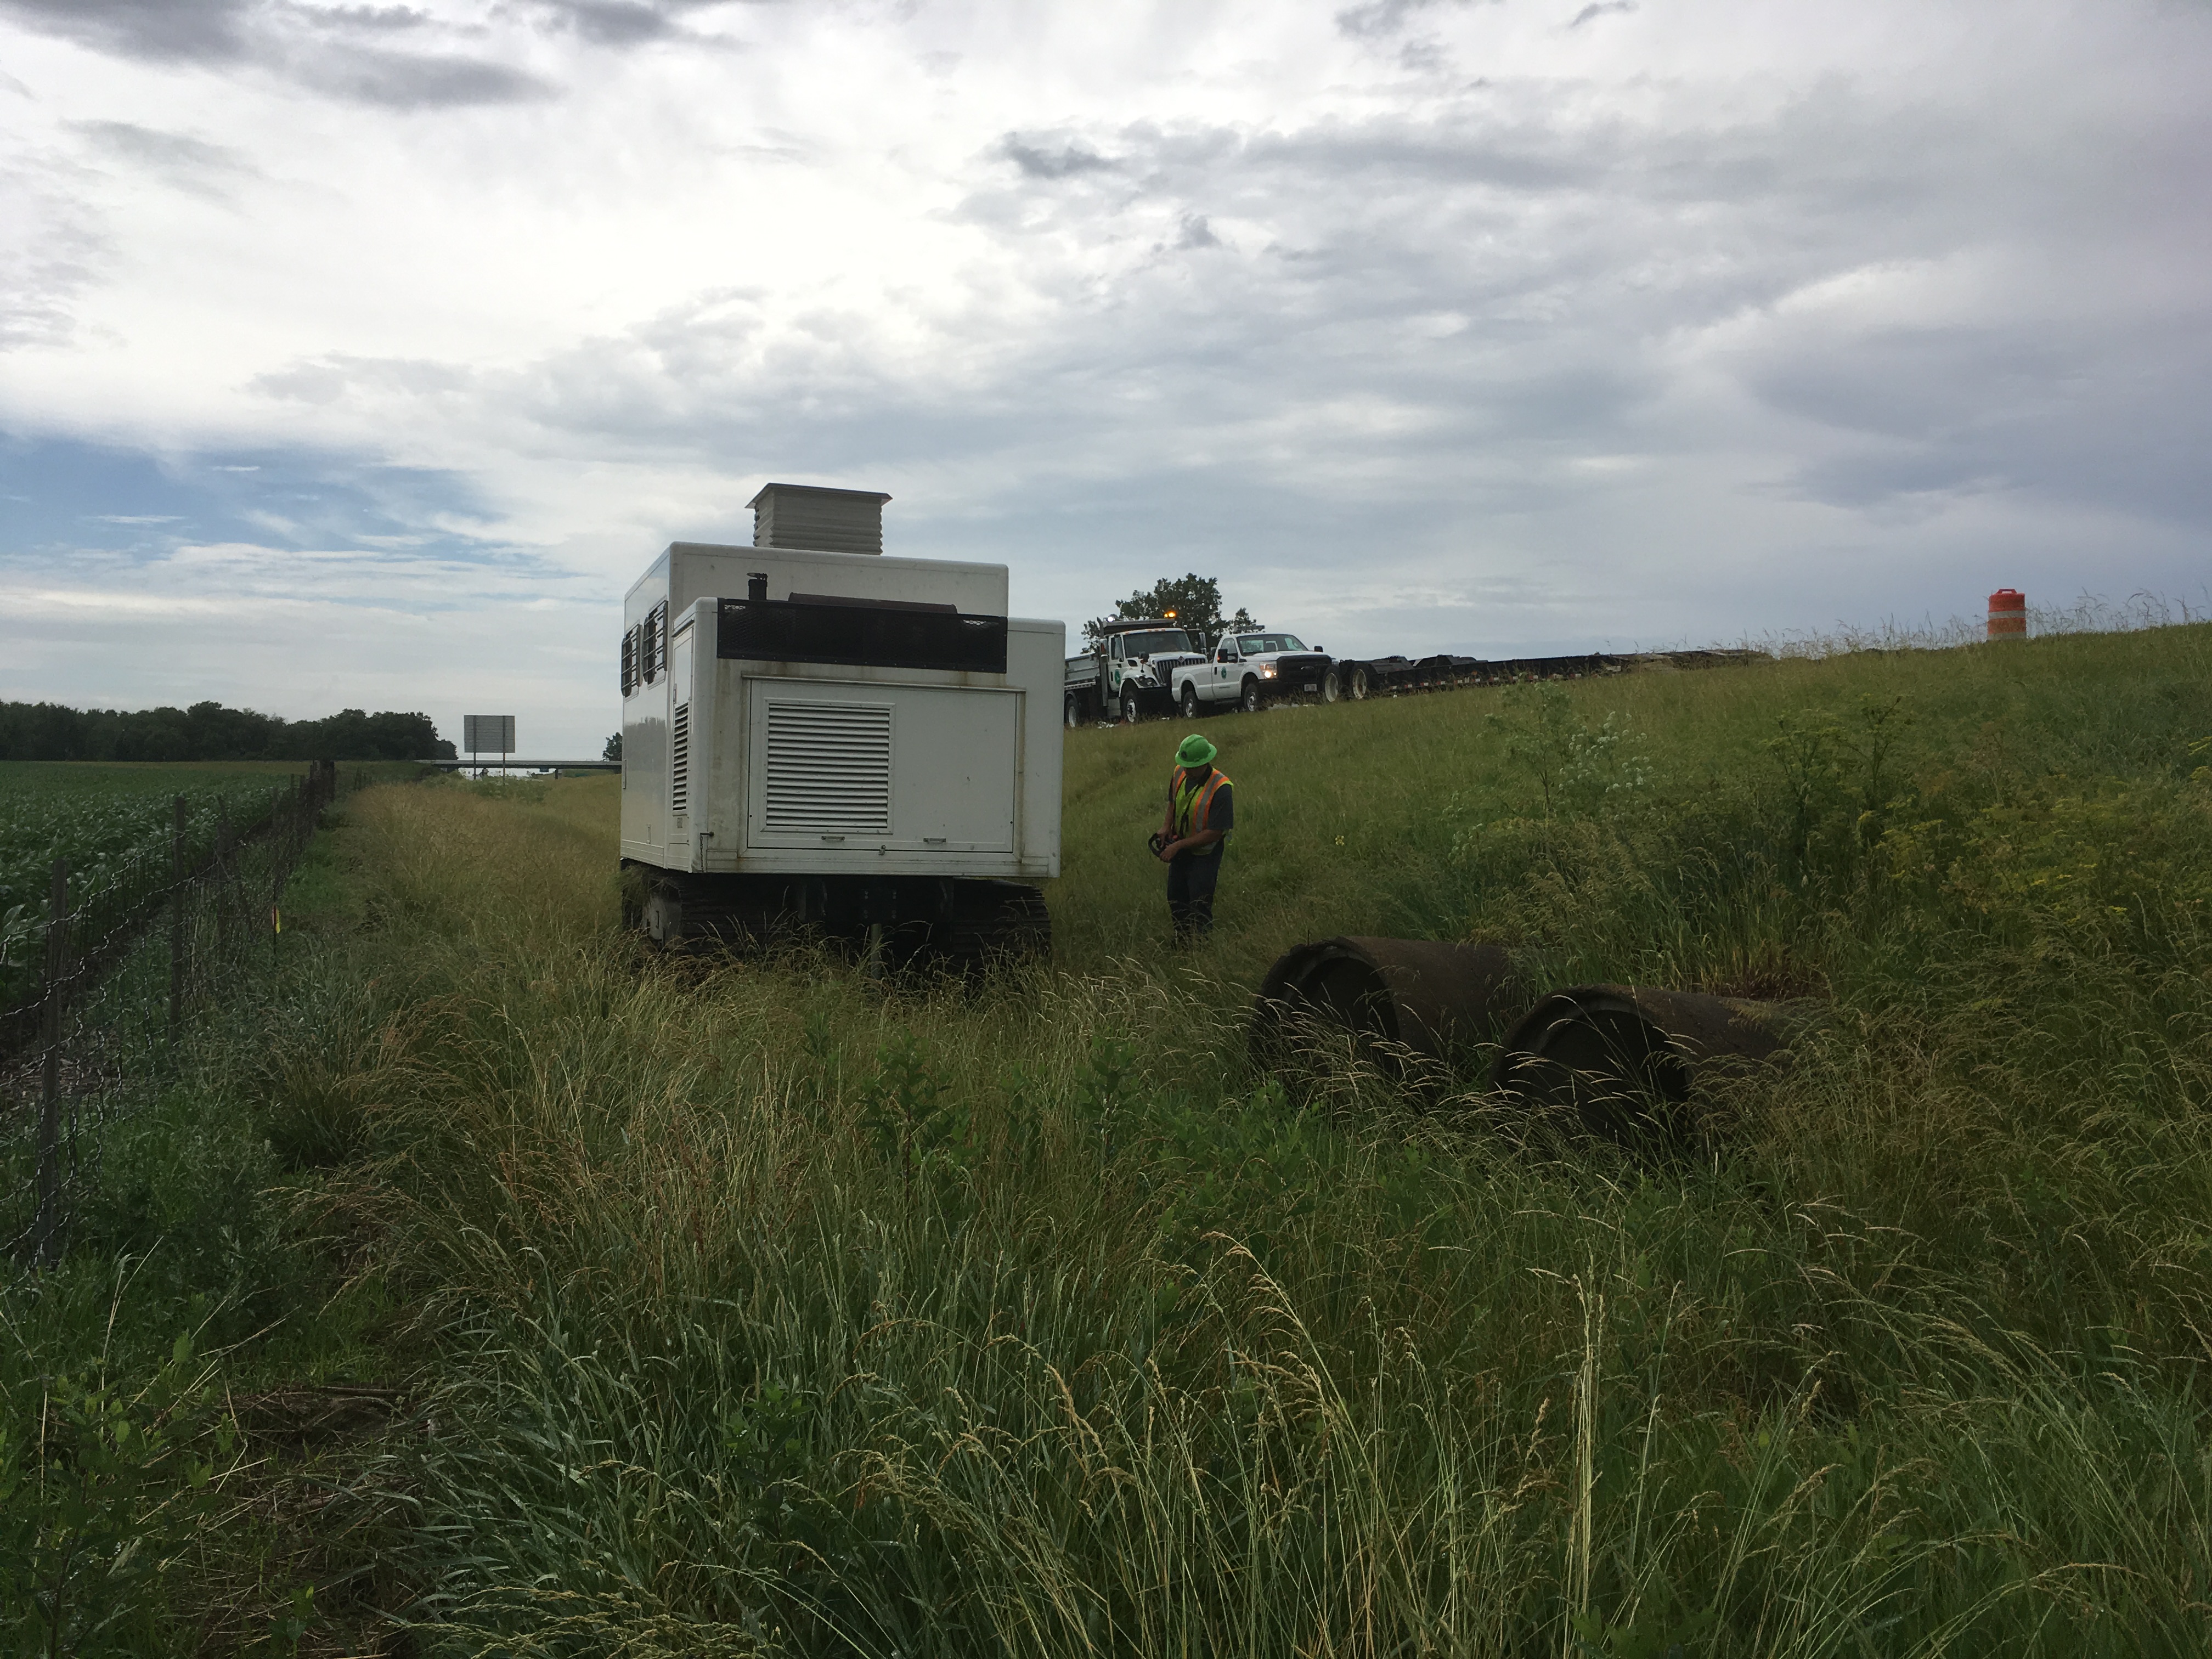 CPT Rig tracking off road for Culvert Exploration